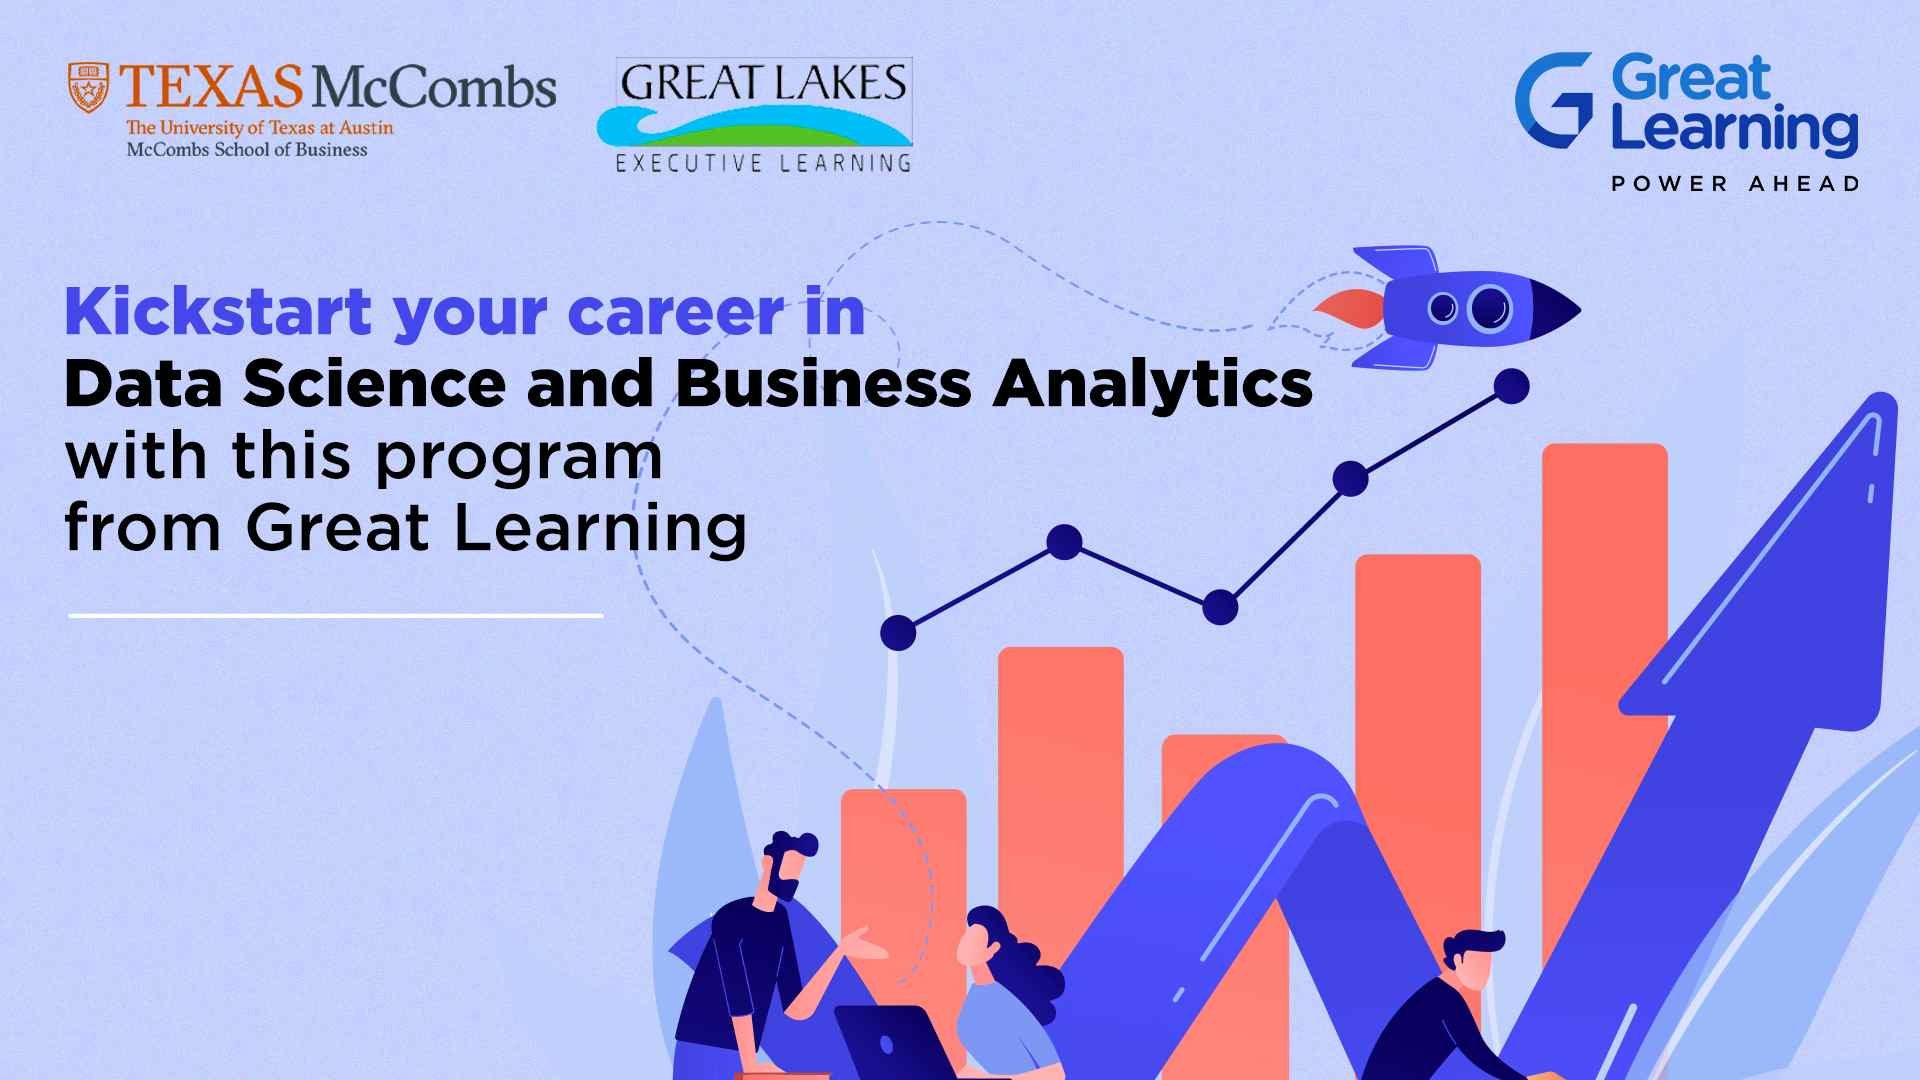 Great Lakes Data Science and Business Analytics Program reviews